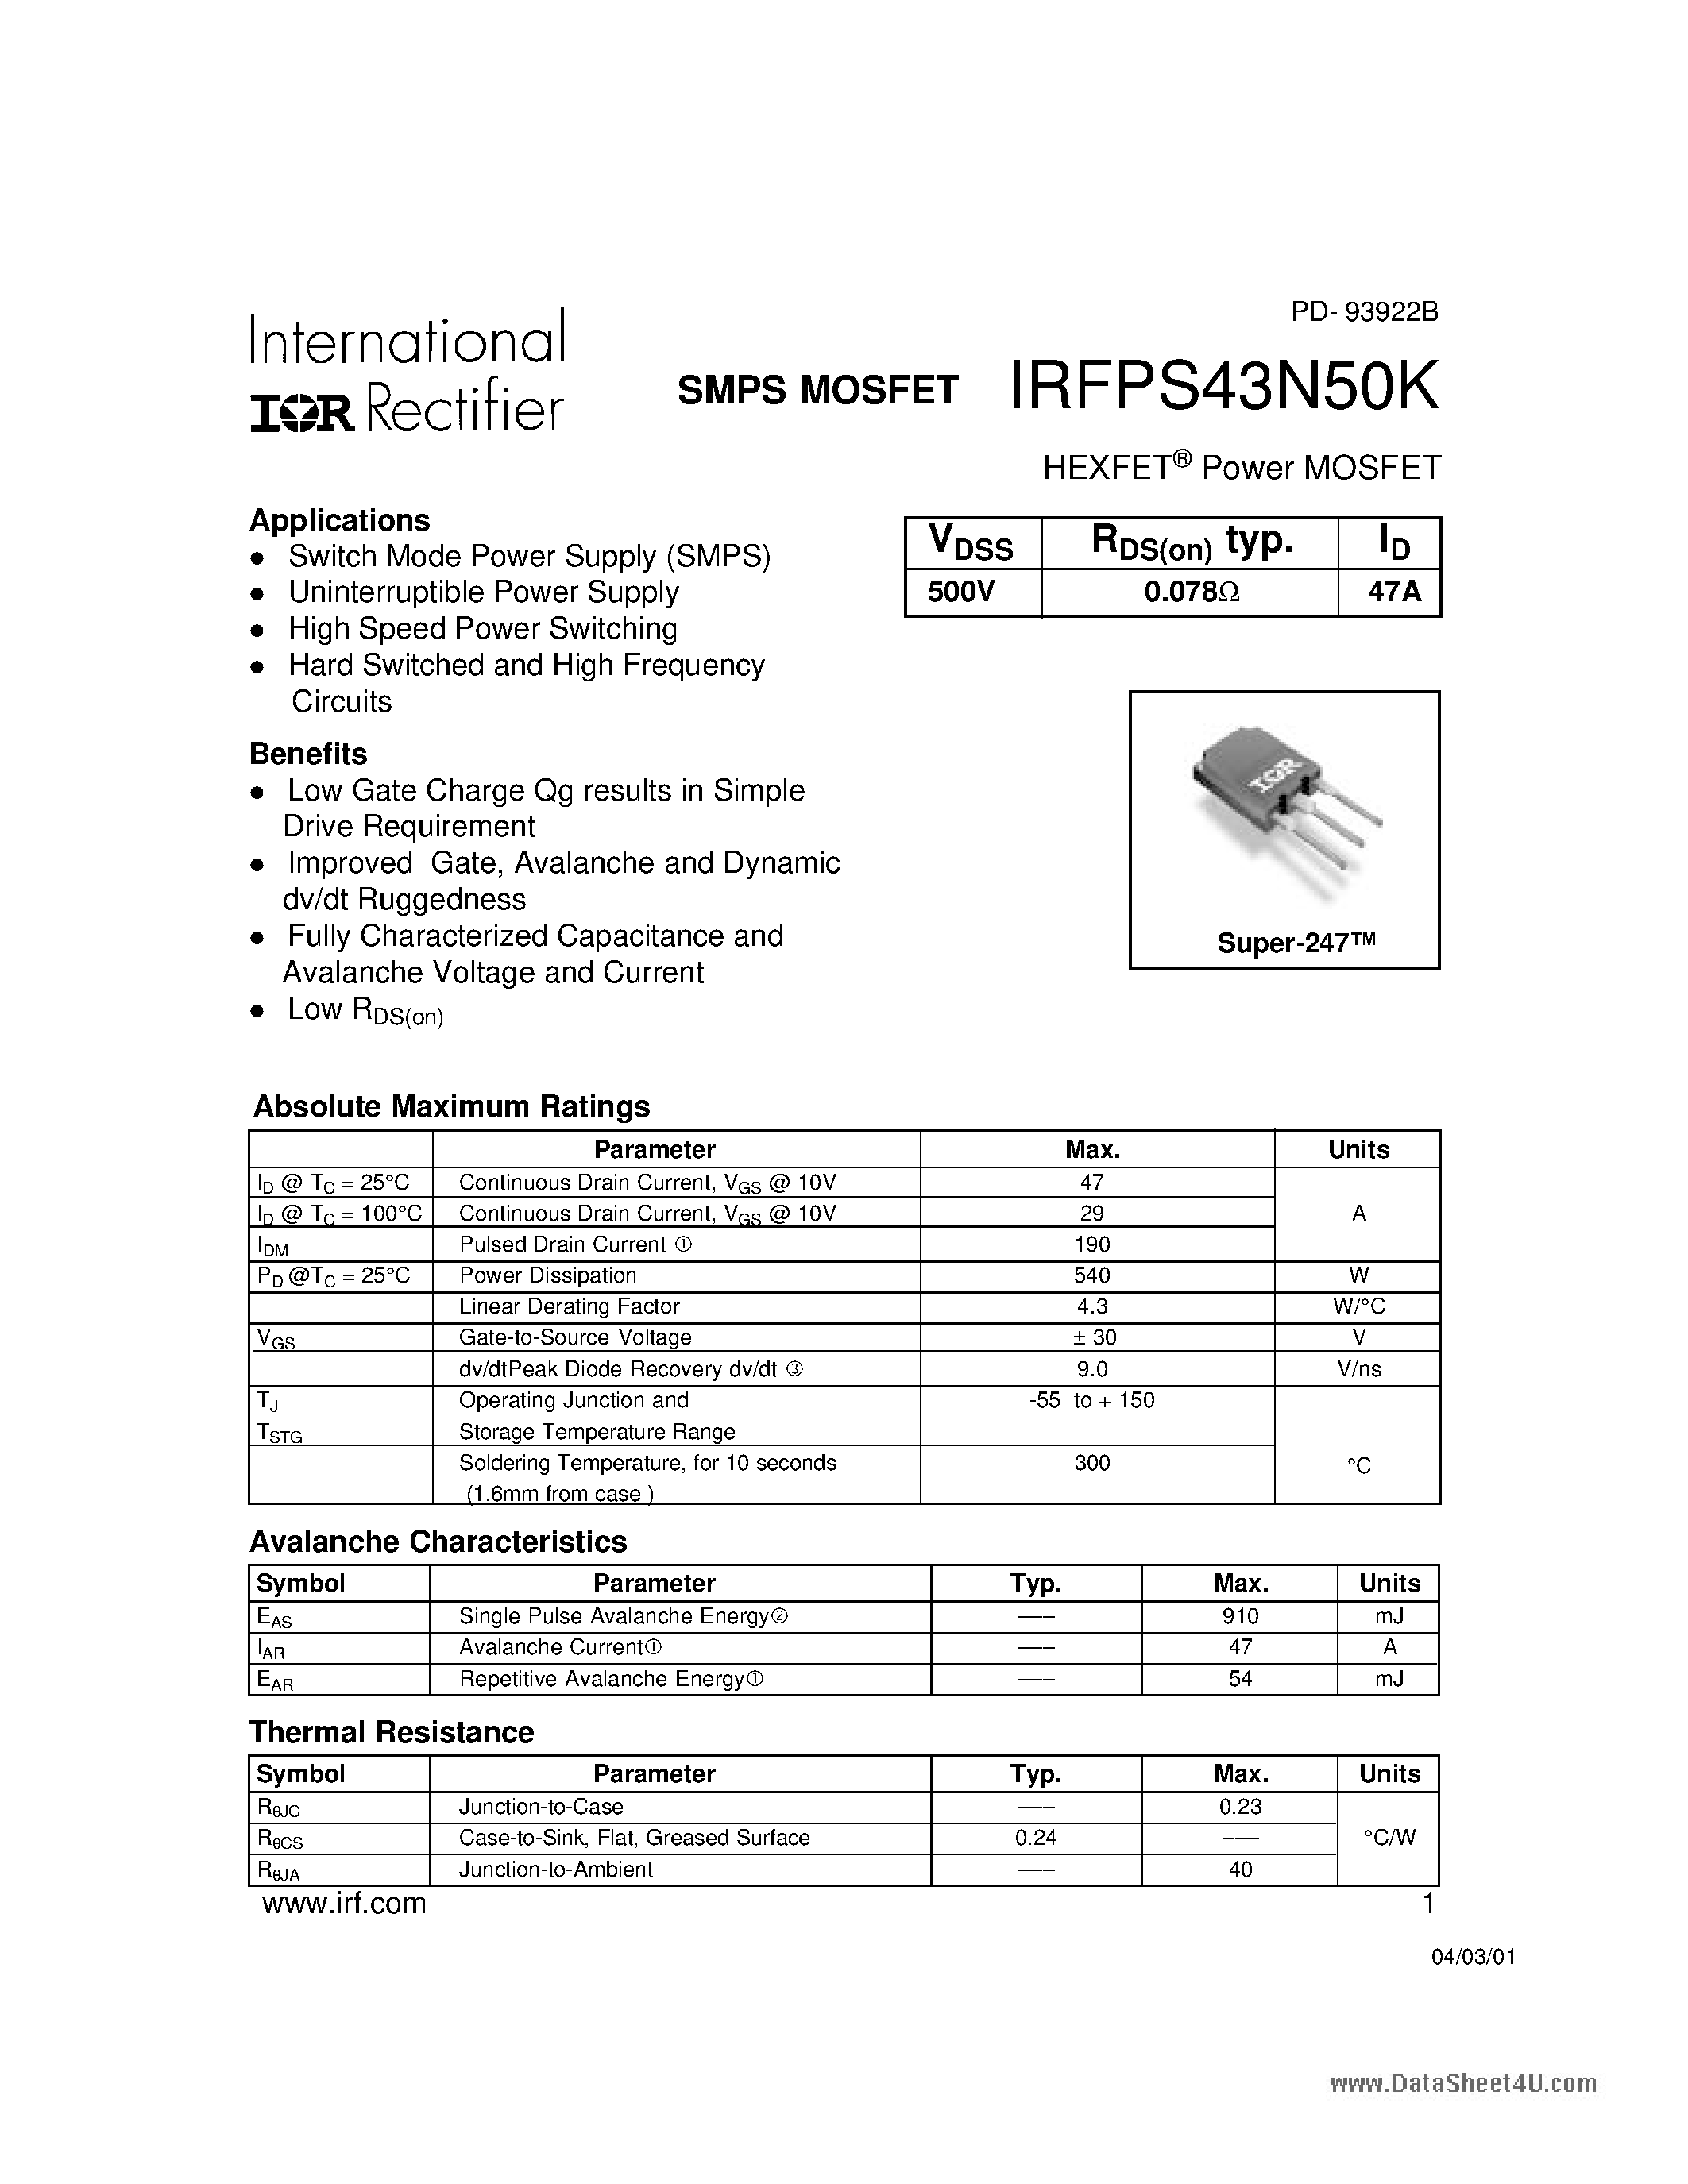 Даташит IRFPS43N50K - HEXFET Power MOSFET страница 1